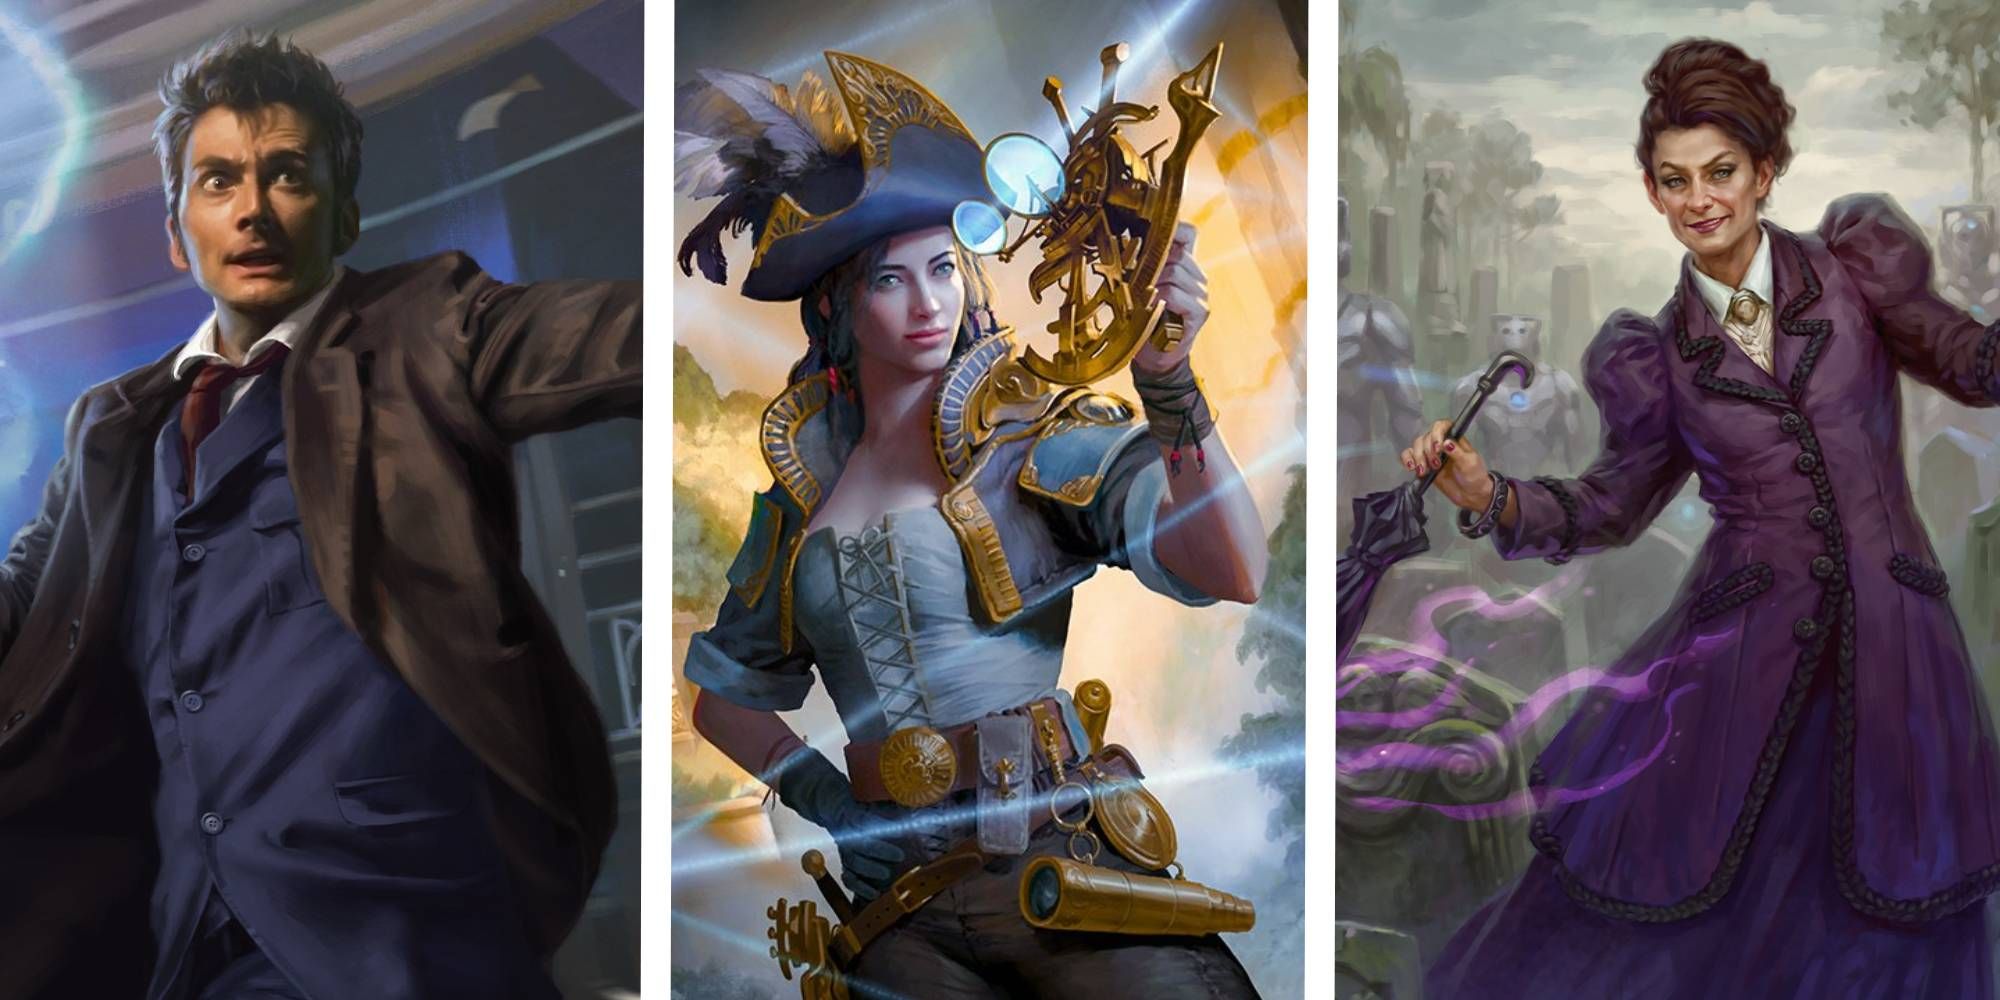 Magic The Gathering Doctor Who Combos Feature The Tenth Doctor, Timestream Navigator, and Missy